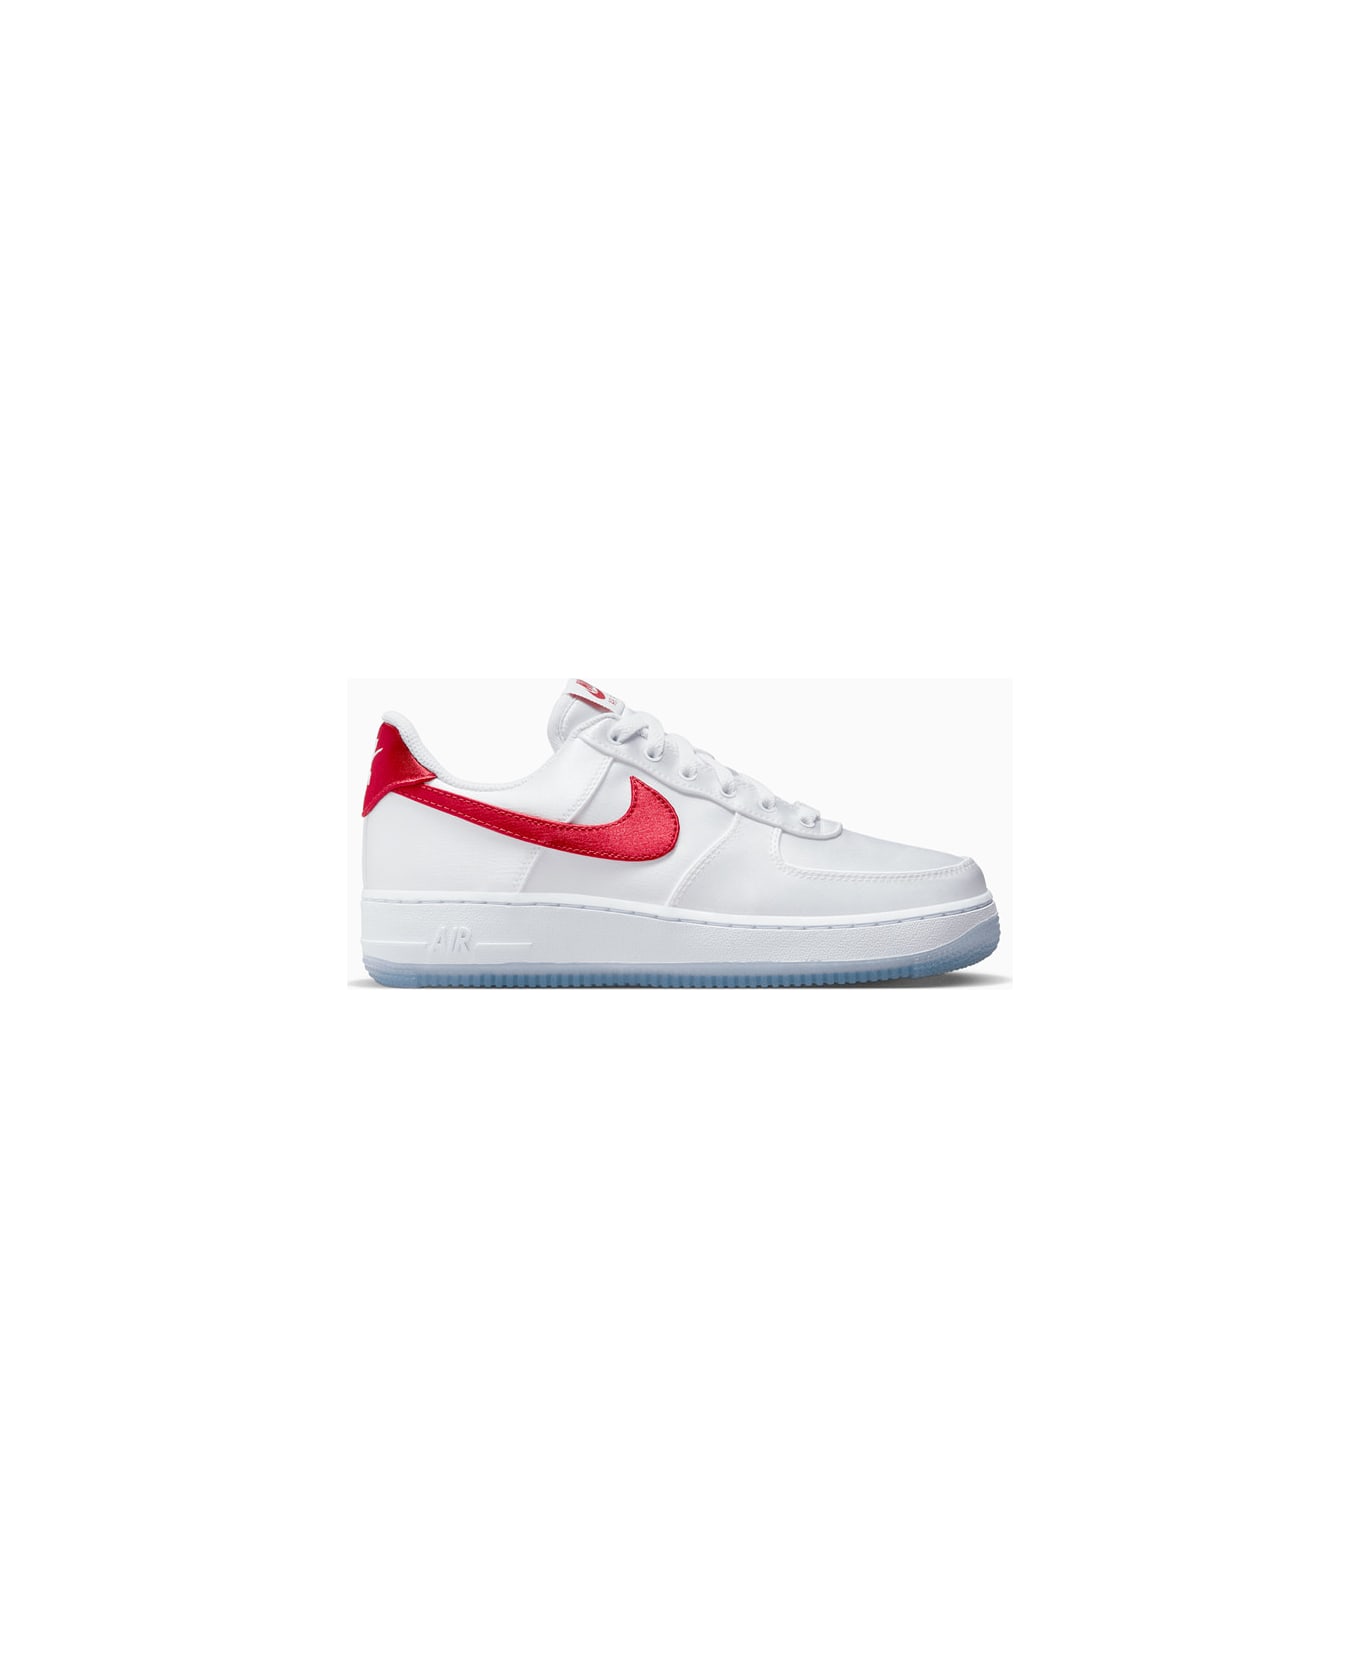 Nike Air Force 1 '07 Ess Snkr Sneakers Dx6541-100 - White